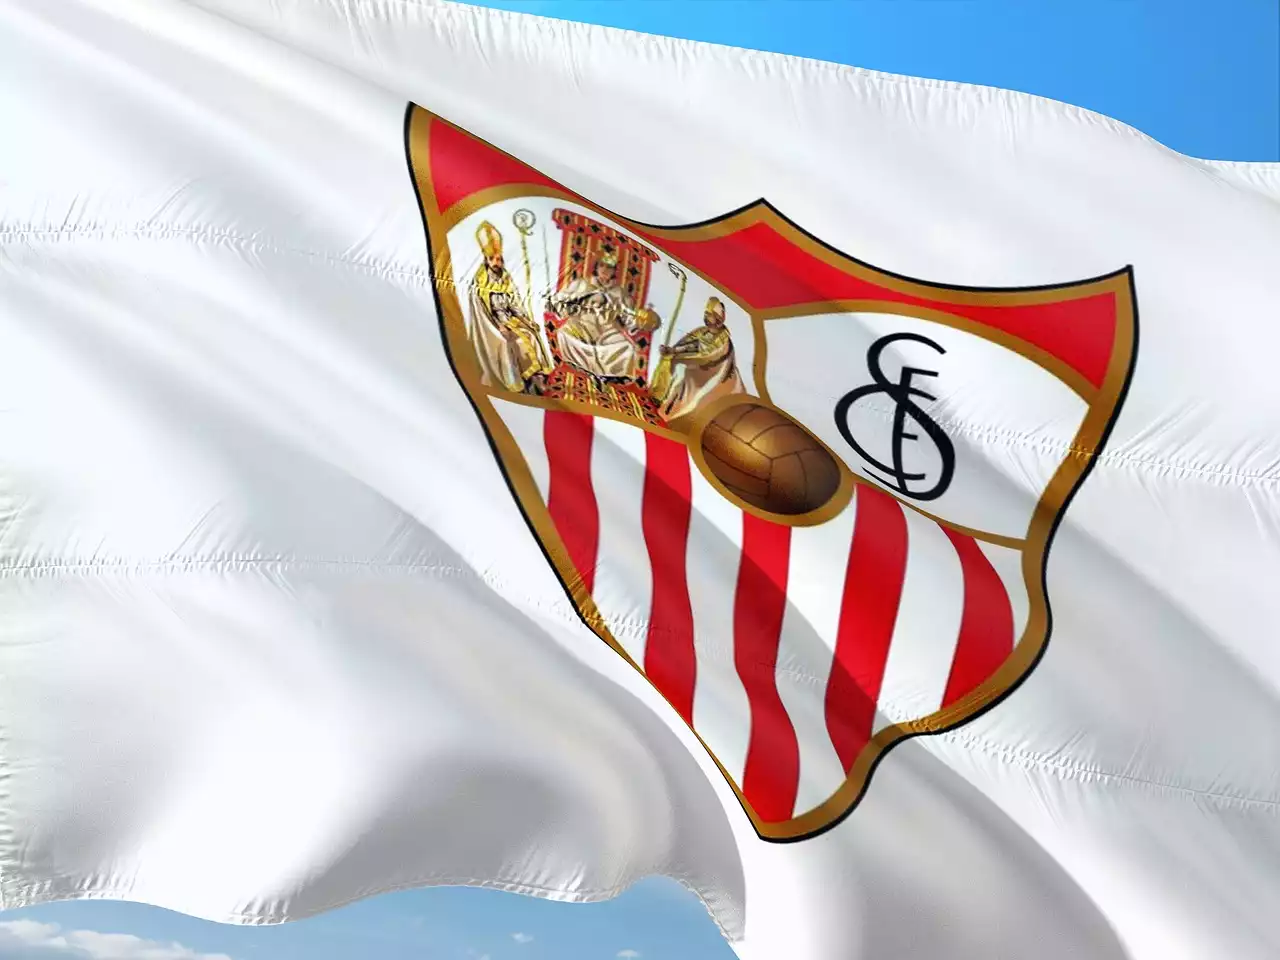 Sevilla FC supporters: Biris Norte Offer Undying Loyalty in Copa Del Ray